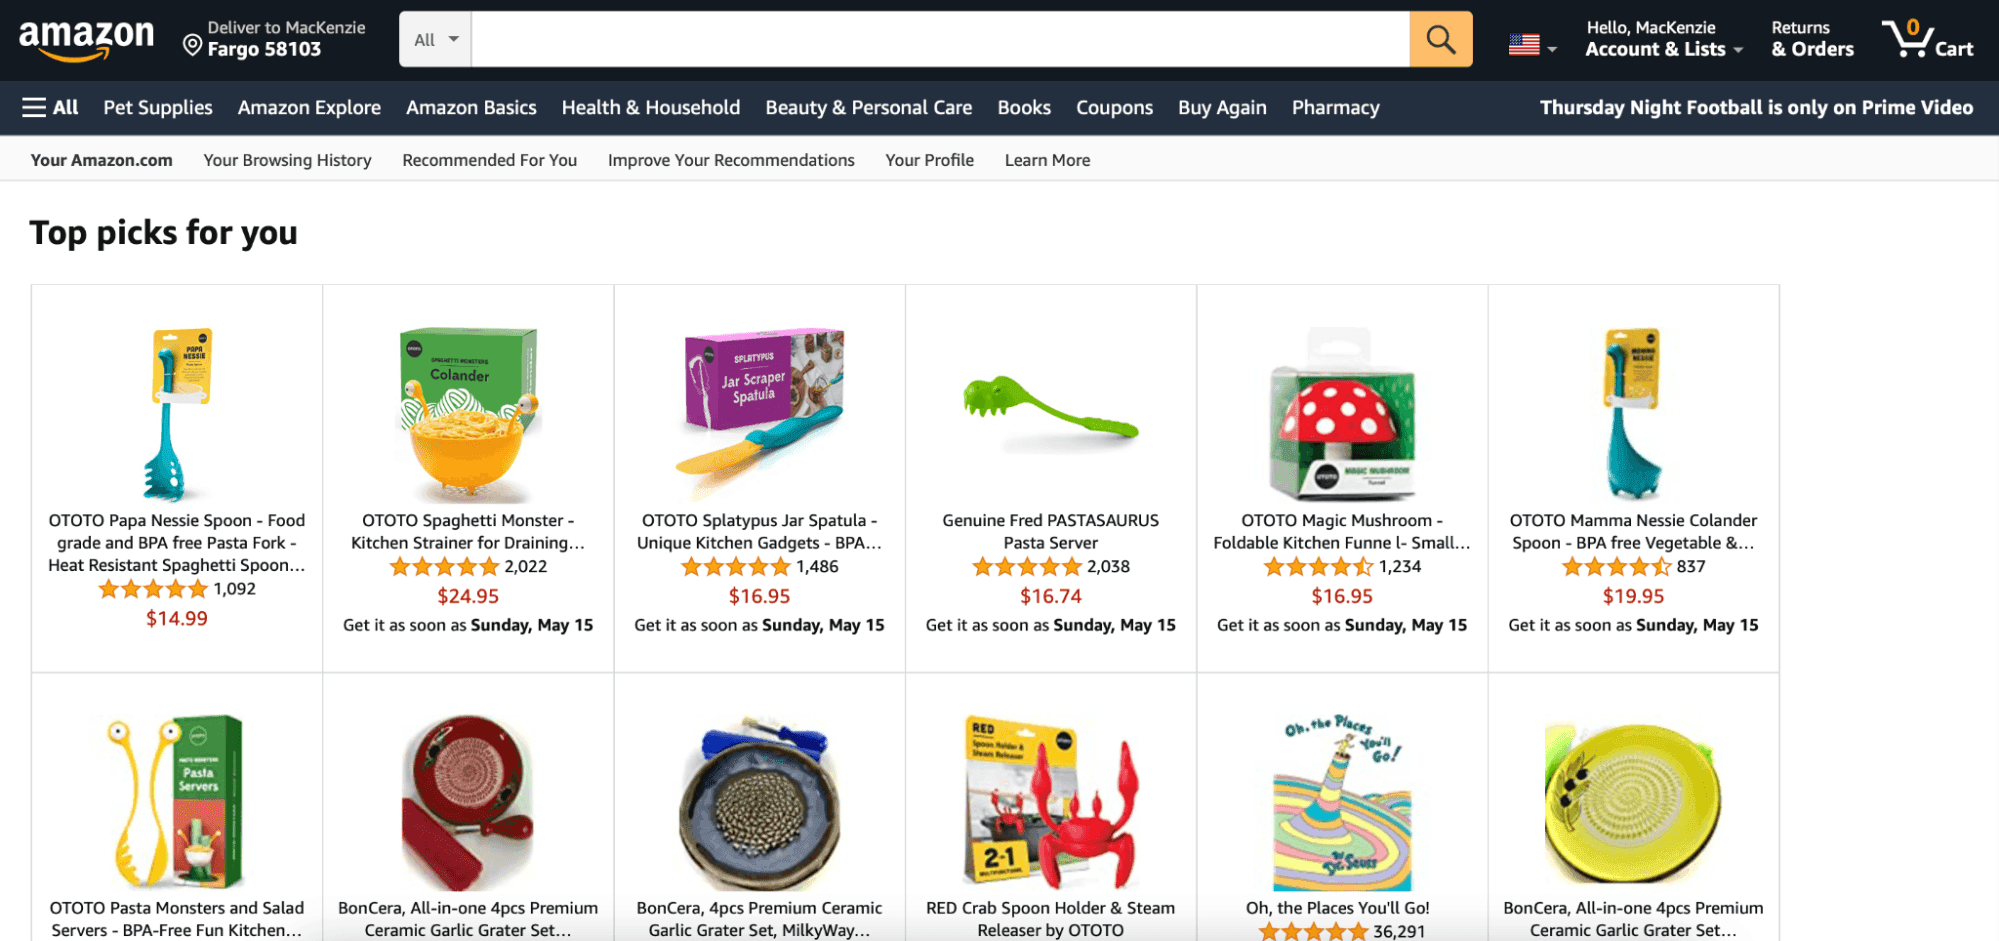 Image showcasing Amazon's personalized recommendations feature.